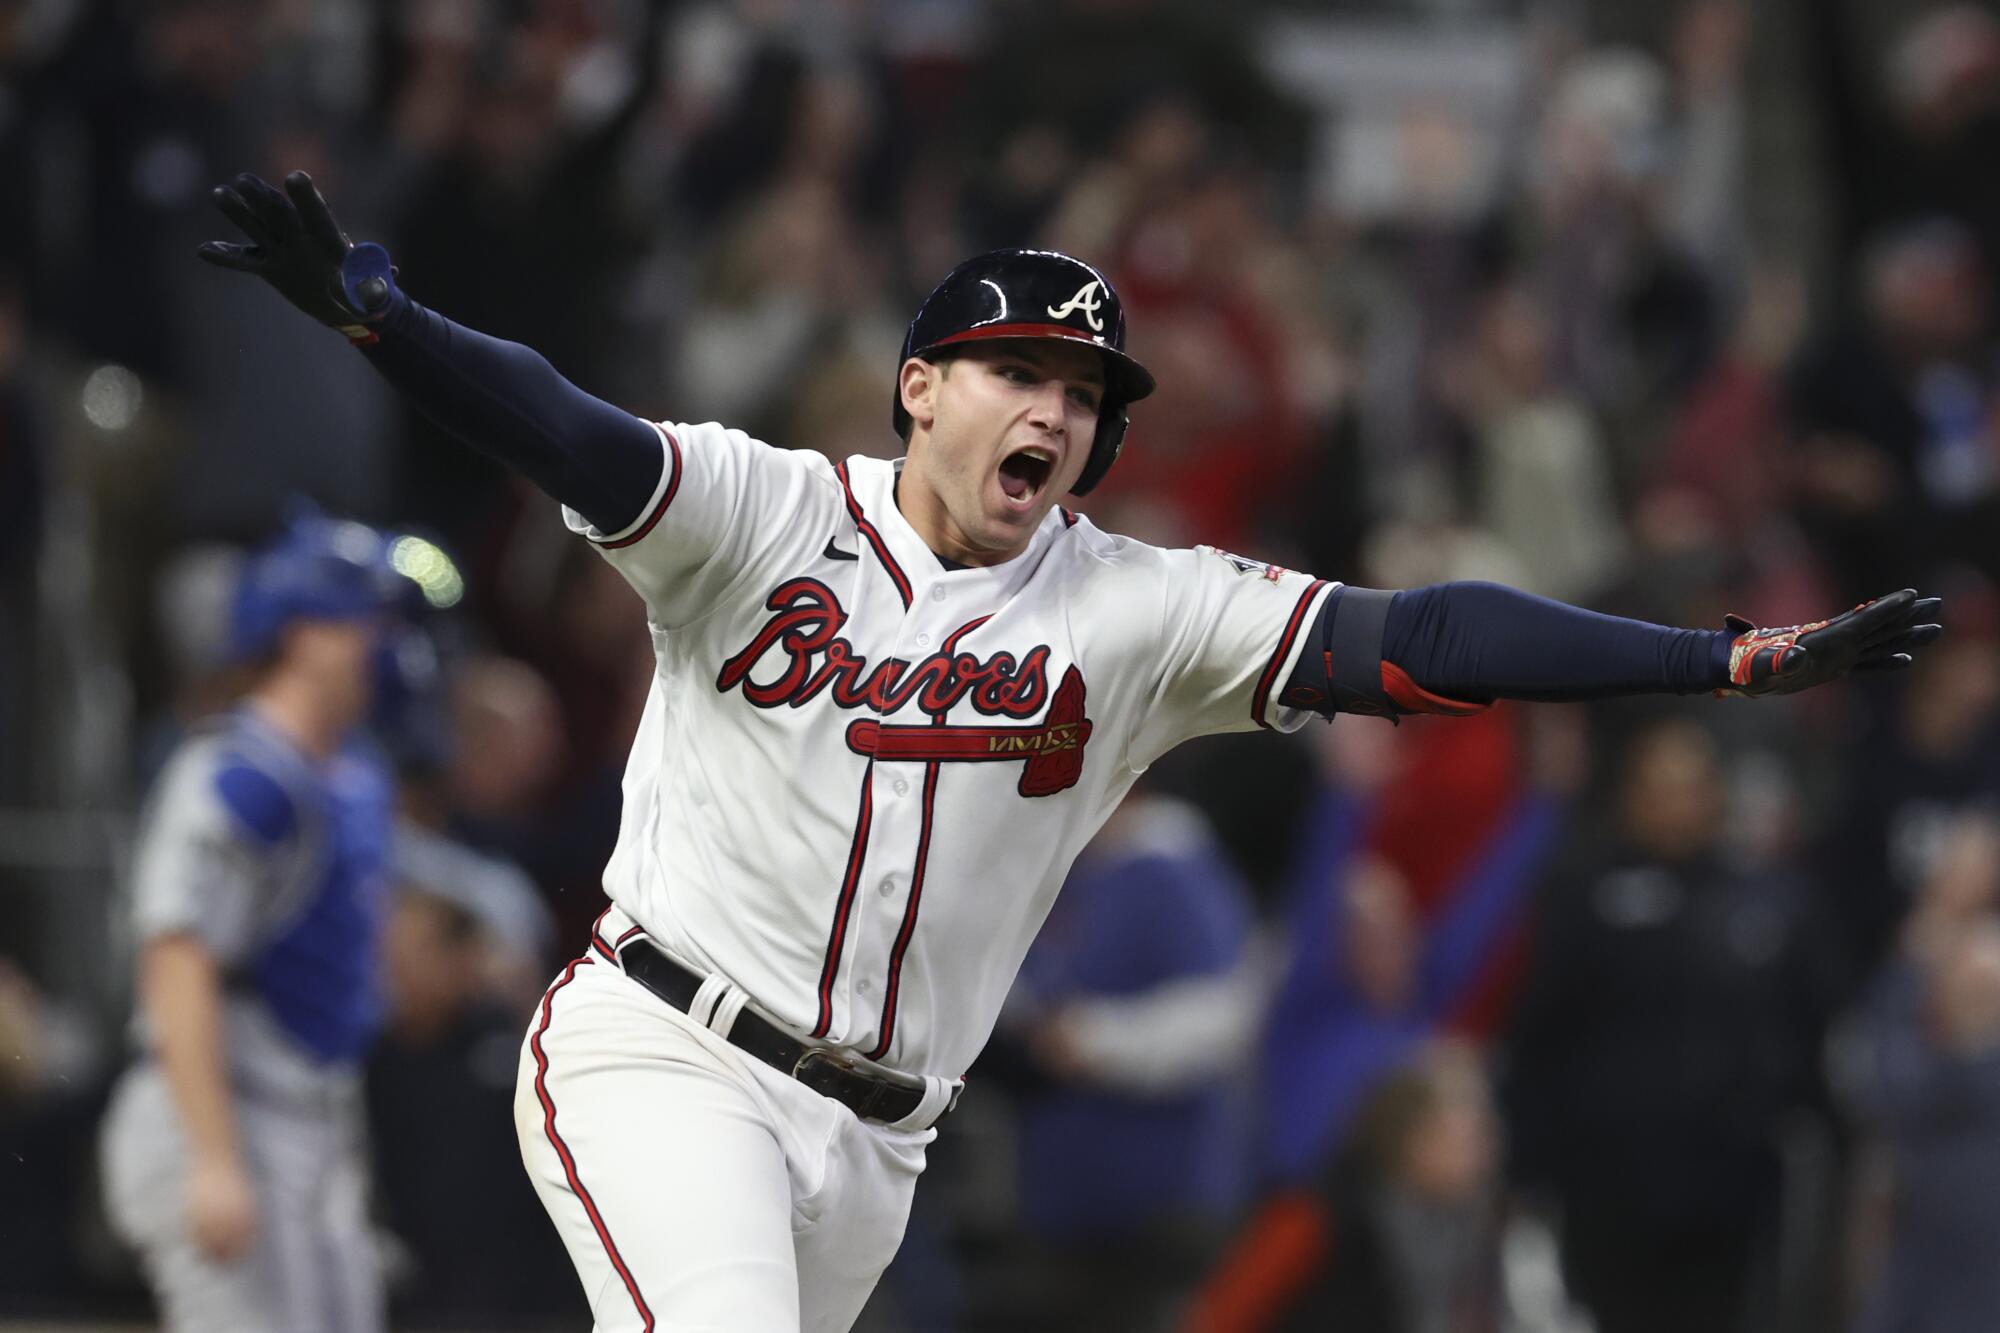 Braves' Austin Riley reacts after hitting a walk off RBI single to score Ozzie Albies during the ninth inning